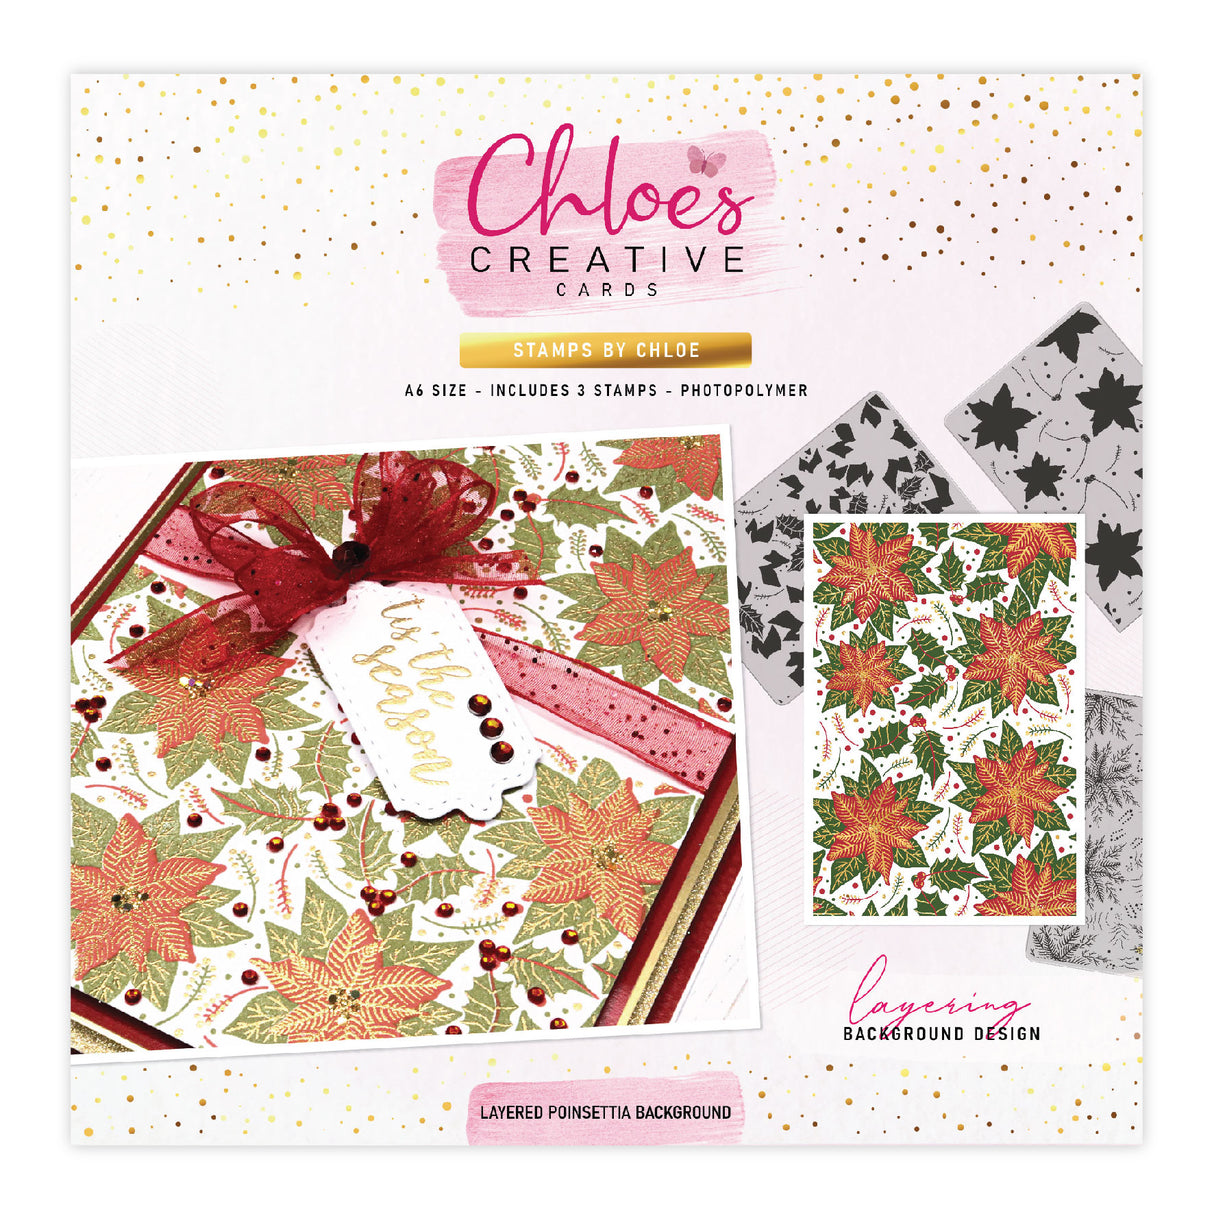 Chloes Creative Cards Photopolymer Stamp Set (A6) - Layered Poinsettia Background